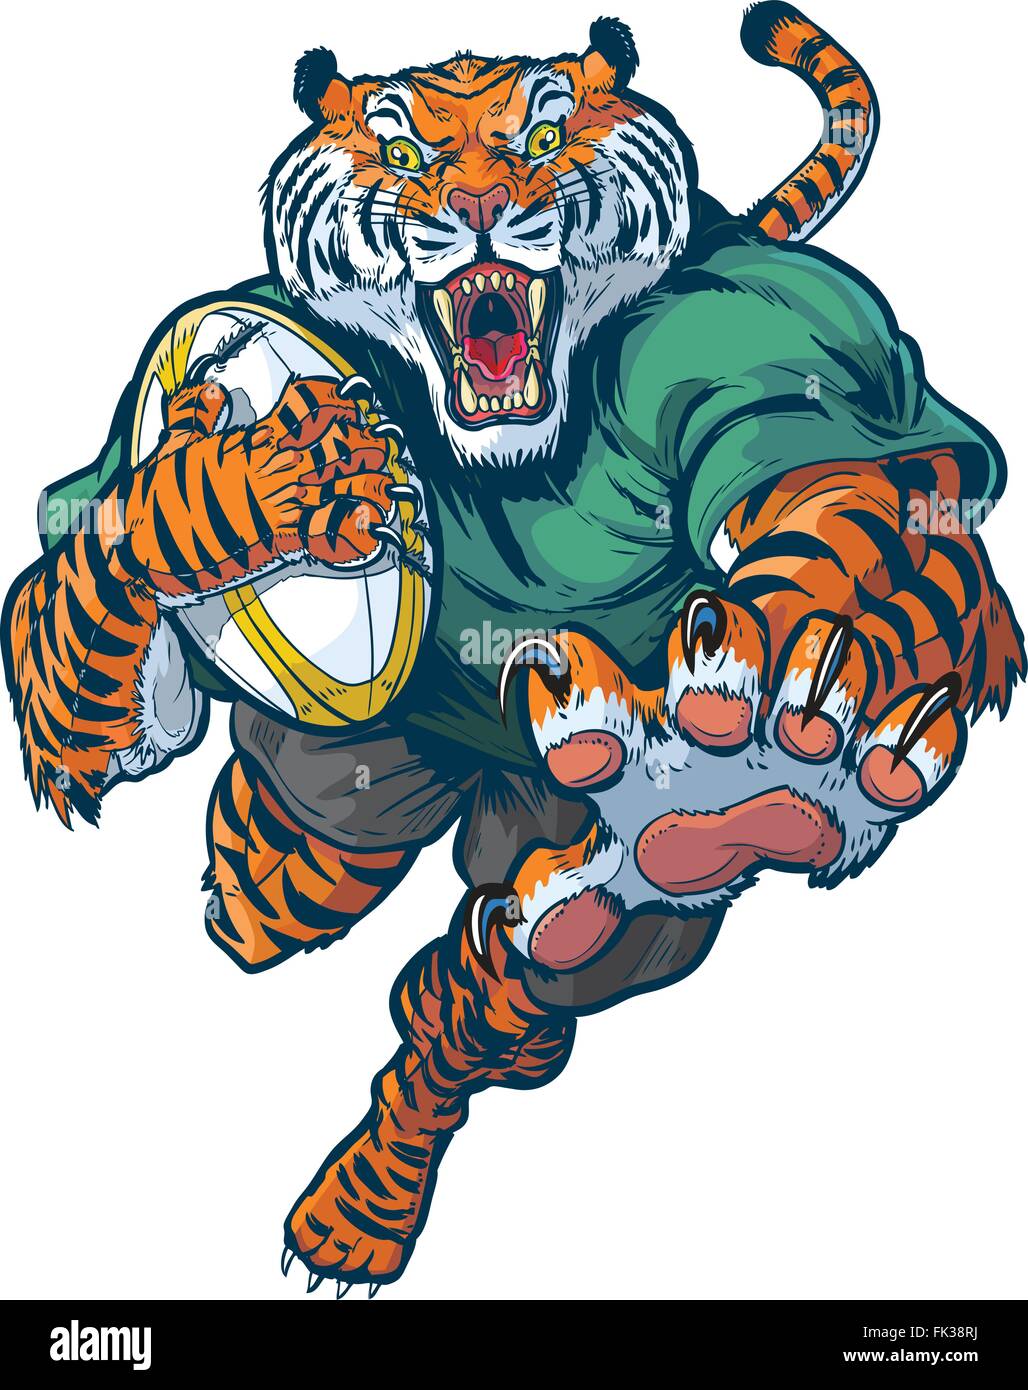 Vector cartoon clip art illustration of a tough mean tiger rugby mascot leaping or jumping forward with claws out. Stock Vector